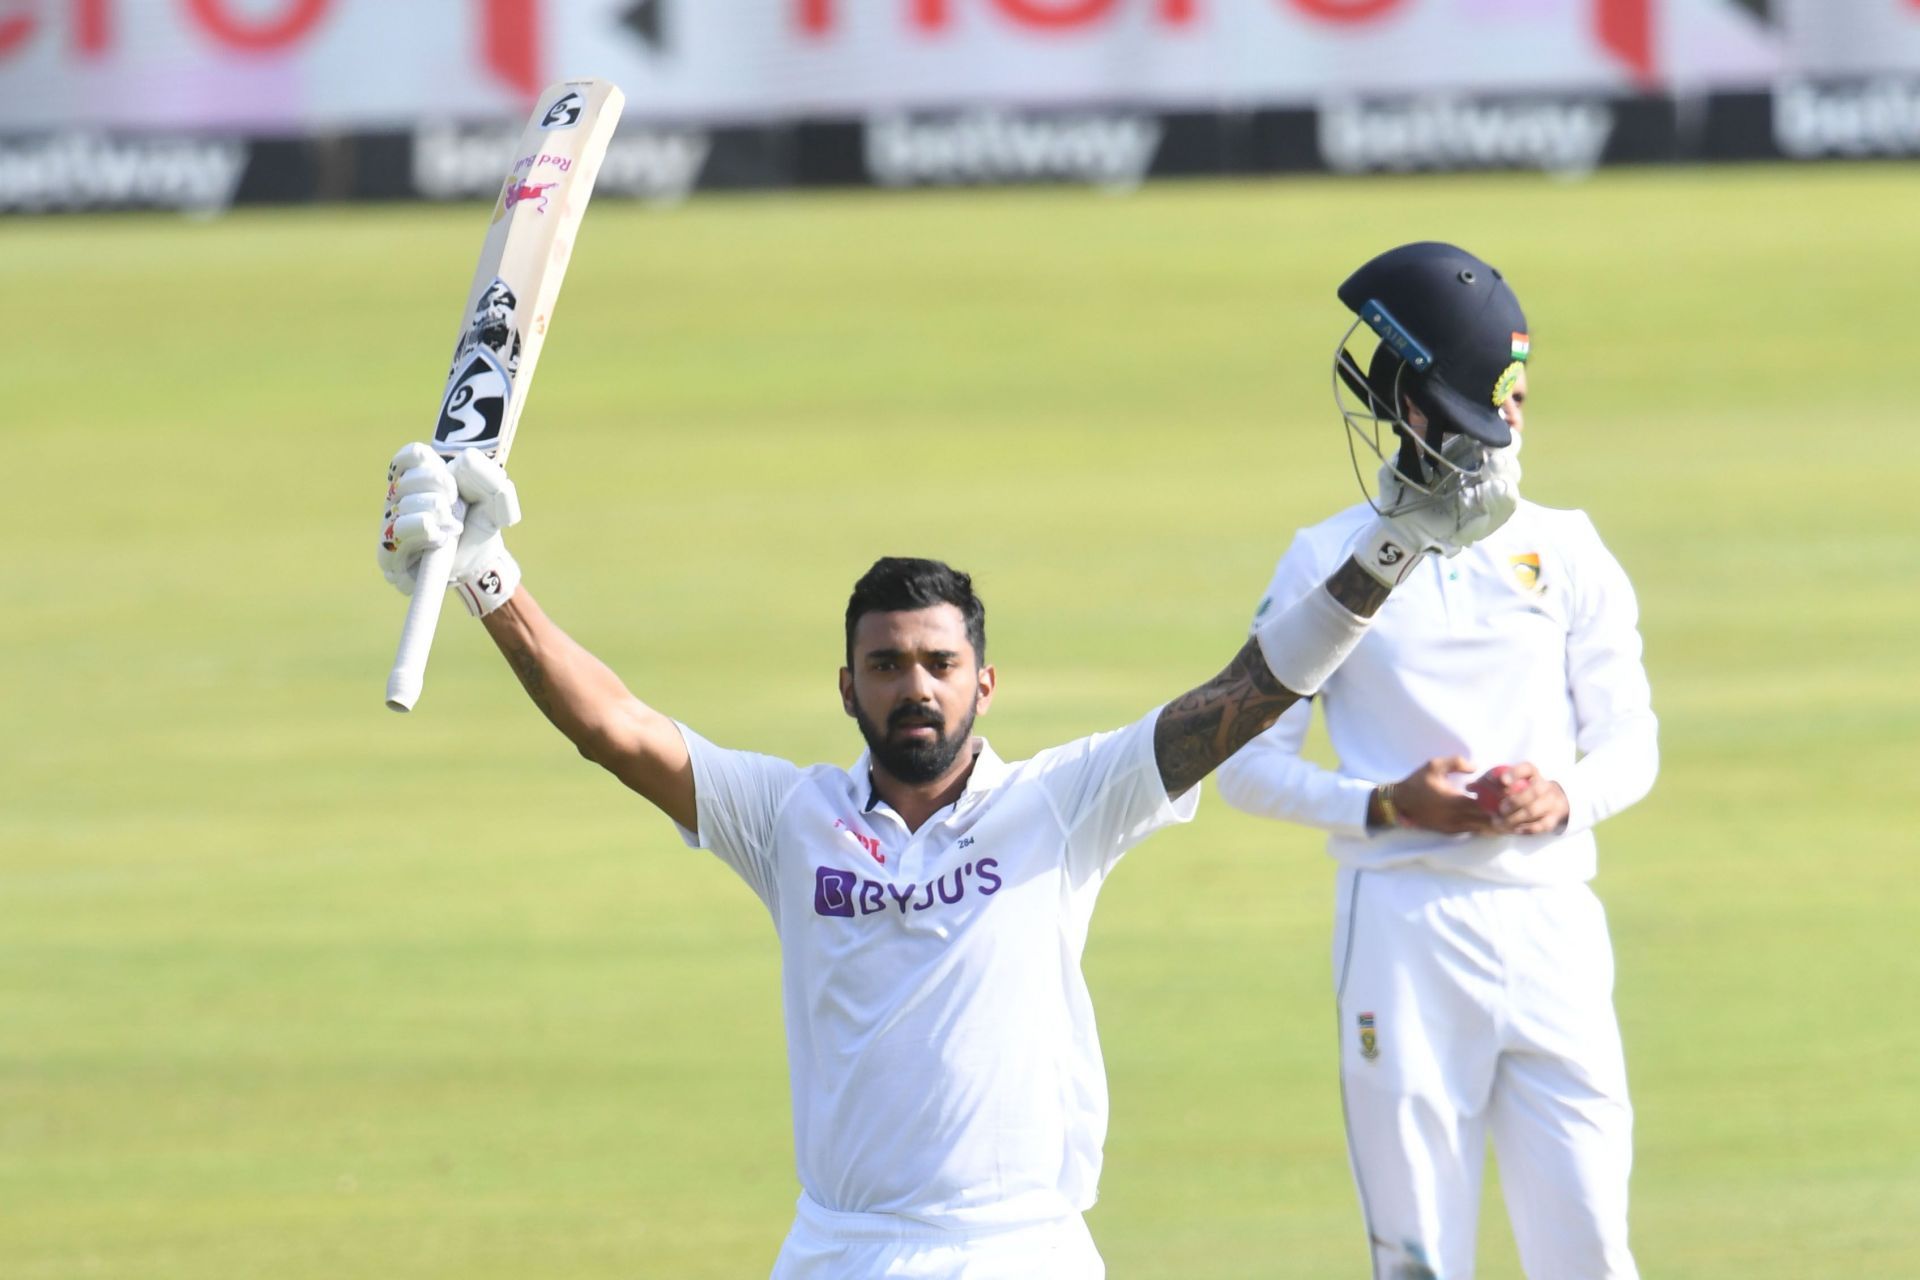 KL Rahul&#039;s 123 in the first innings of the first Test is now the highest score by an Indian opener in South Africa